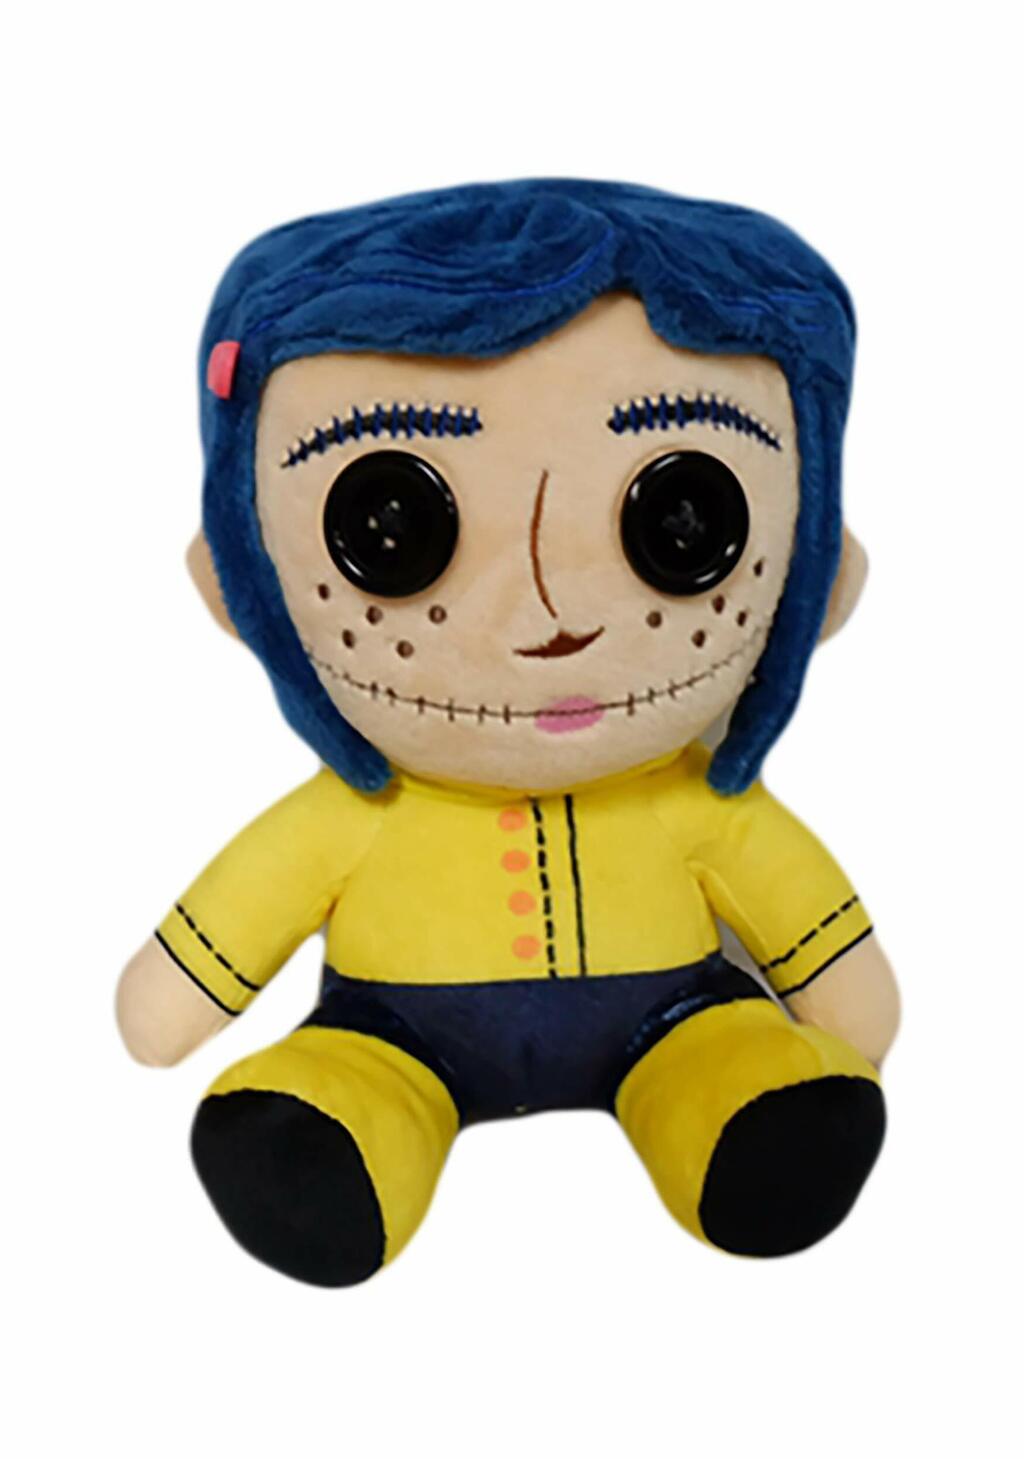 Peluche Neca Kidrobot Coraline with Button Eyes Phunny